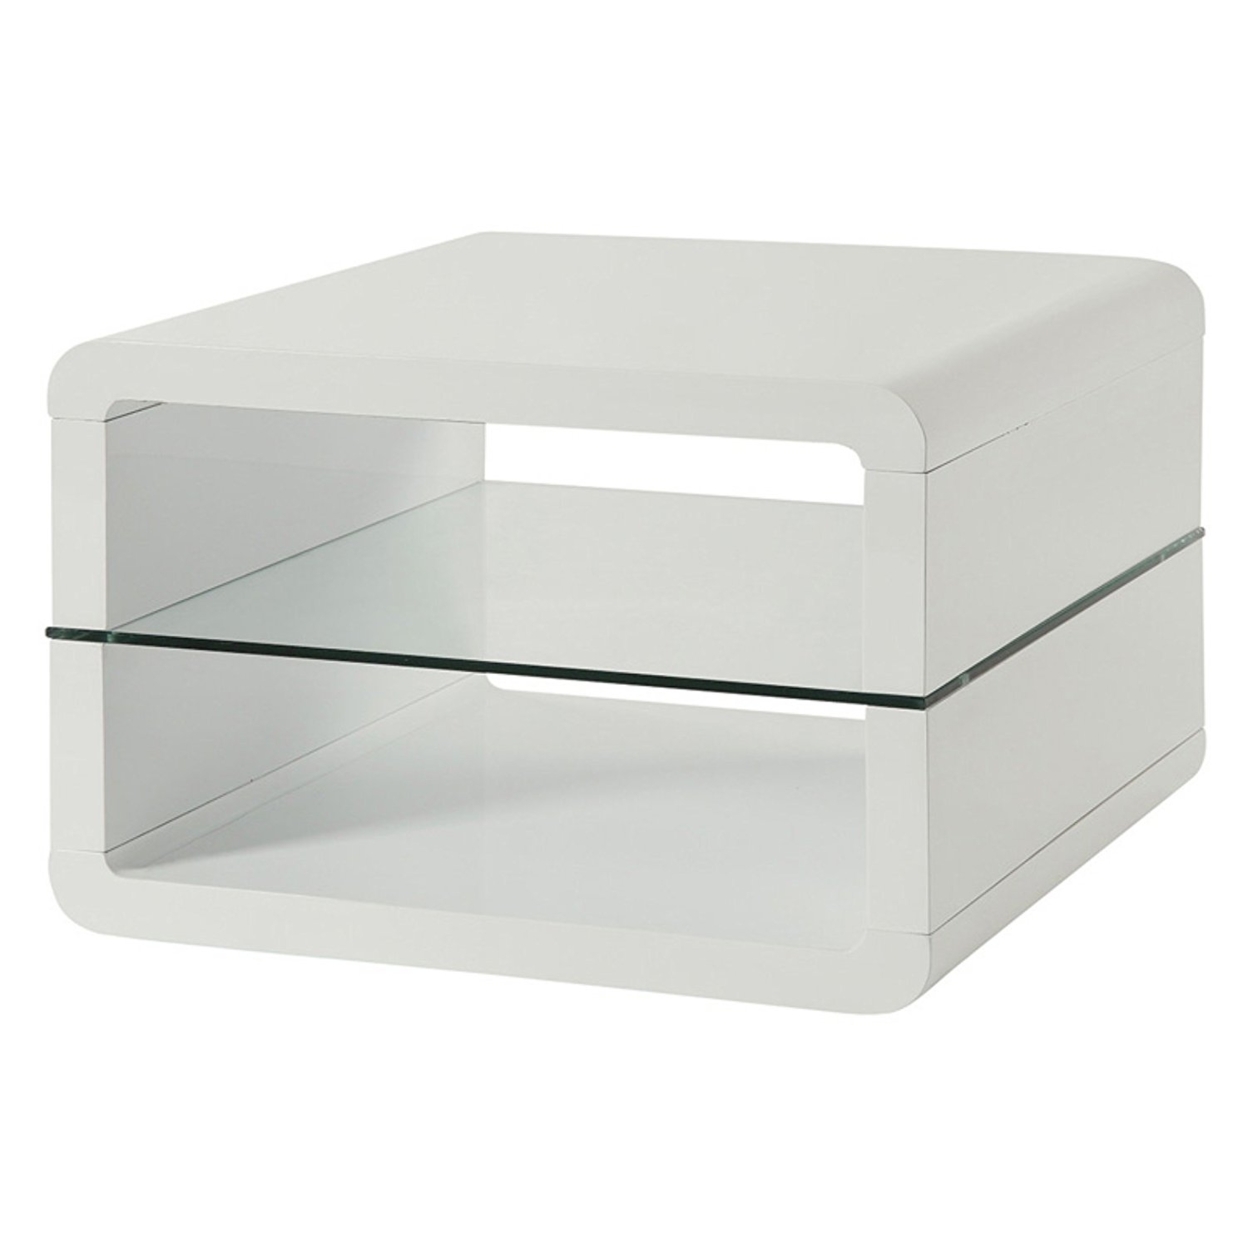 Modern End Table With Rounded Corners & Clear Tempered Glass Shelf, White- Saltoro Sherpi